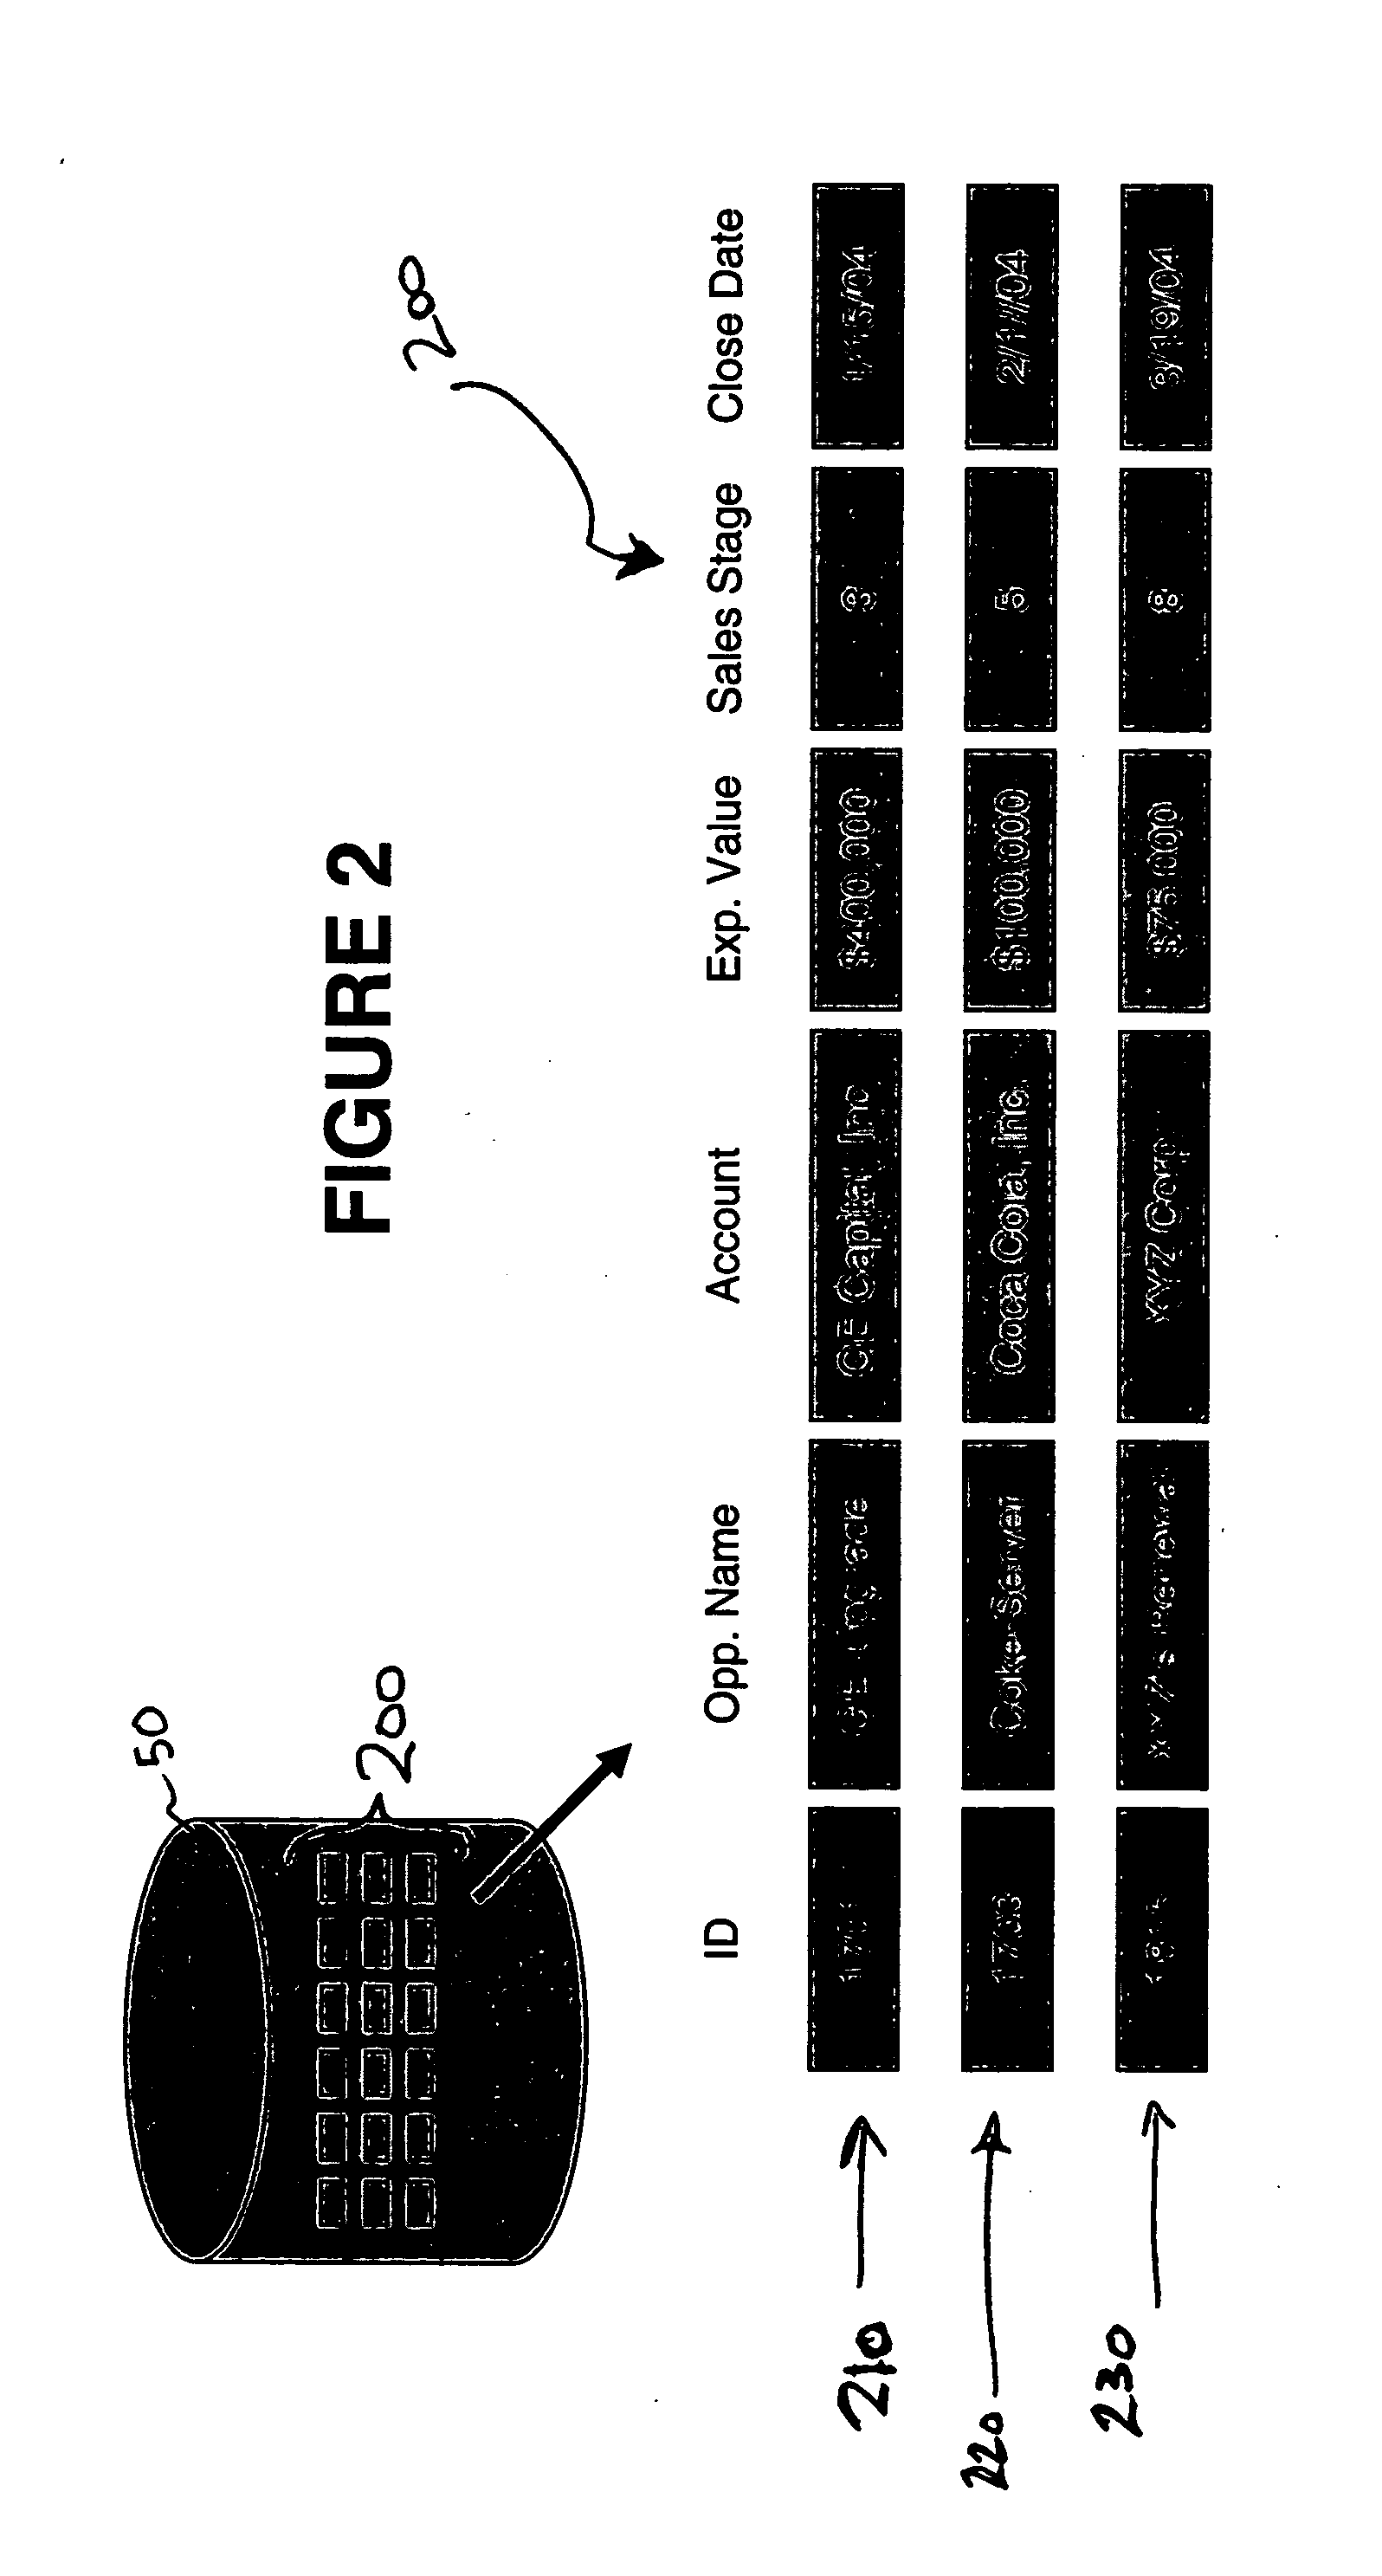 System and method for managing and analyzing data from an operational database